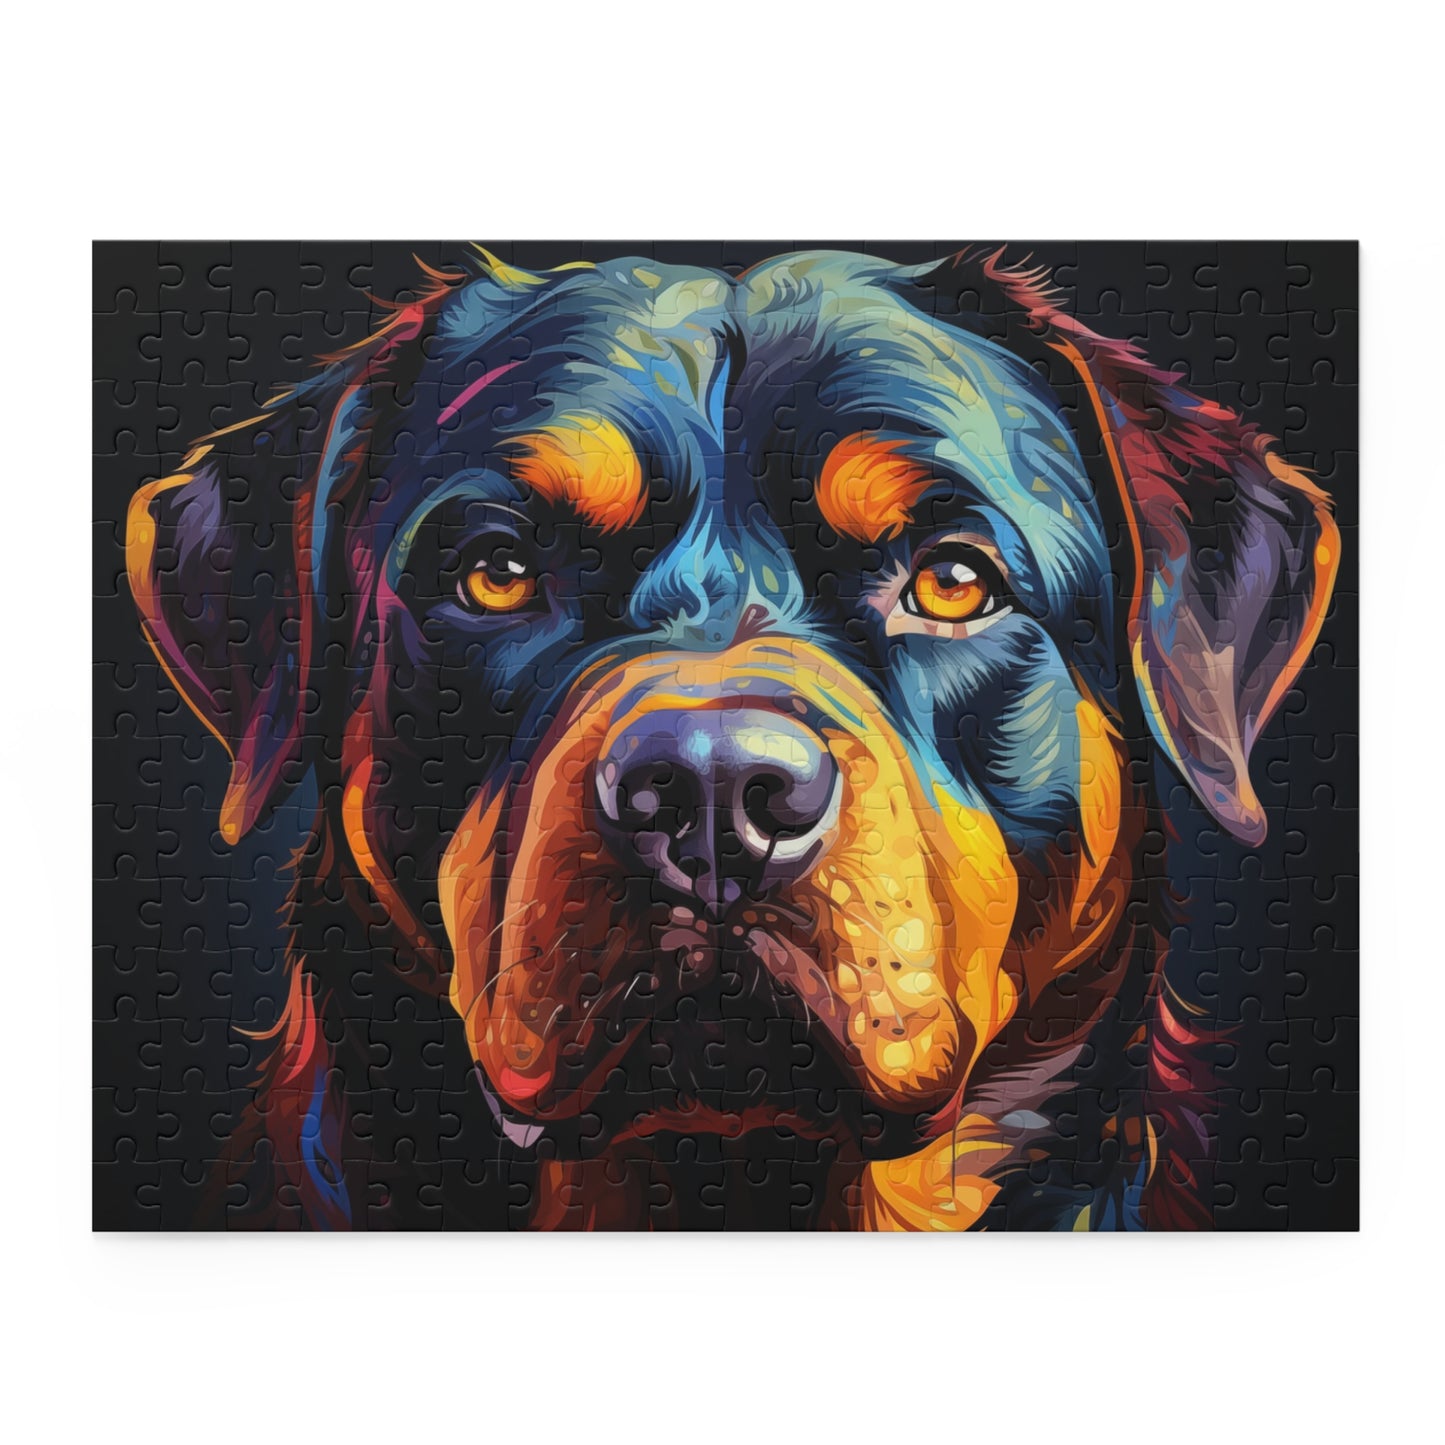 Watercolor Rottweiler Dog Jigsaw Puzzle for Boys, Girls, Kids Adult Birthday Business Jigsaw Puzzle Gift for Him Funny Humorous Indoor Outdoor Game Gift For Her Online-3